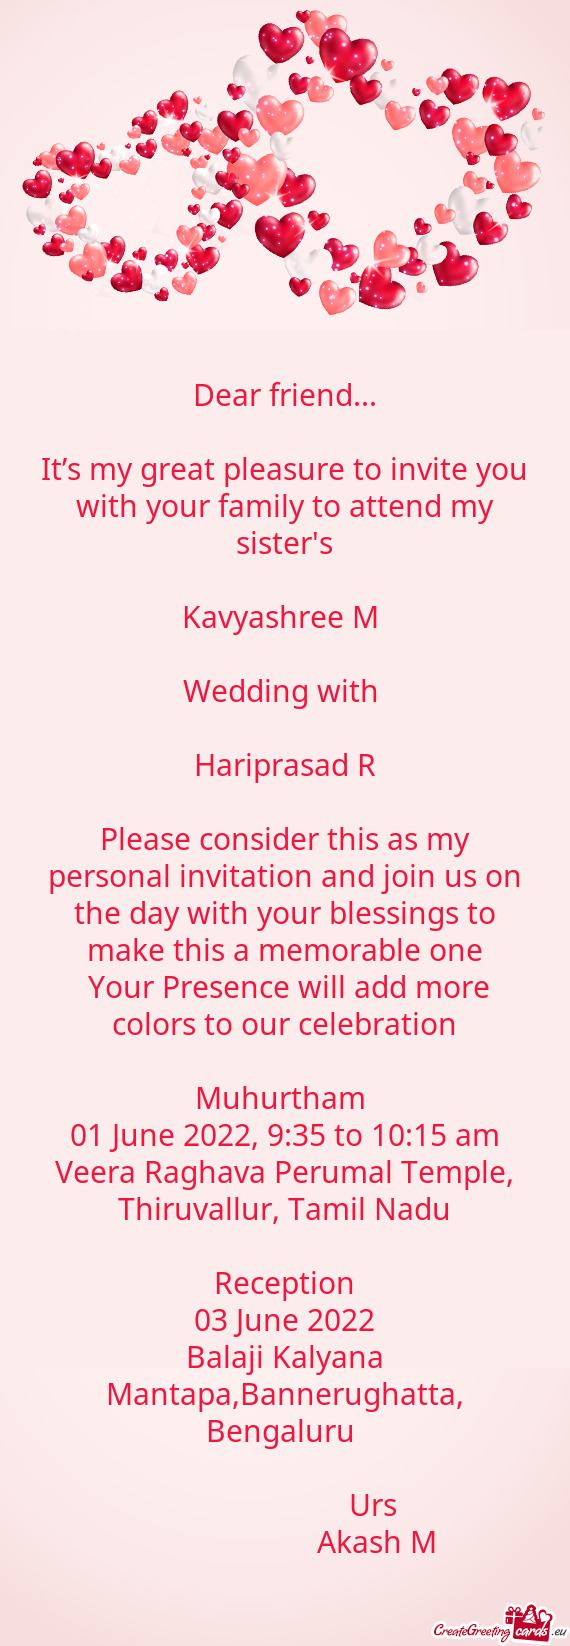 It’s my great pleasure to invite you with your family to attend my sister